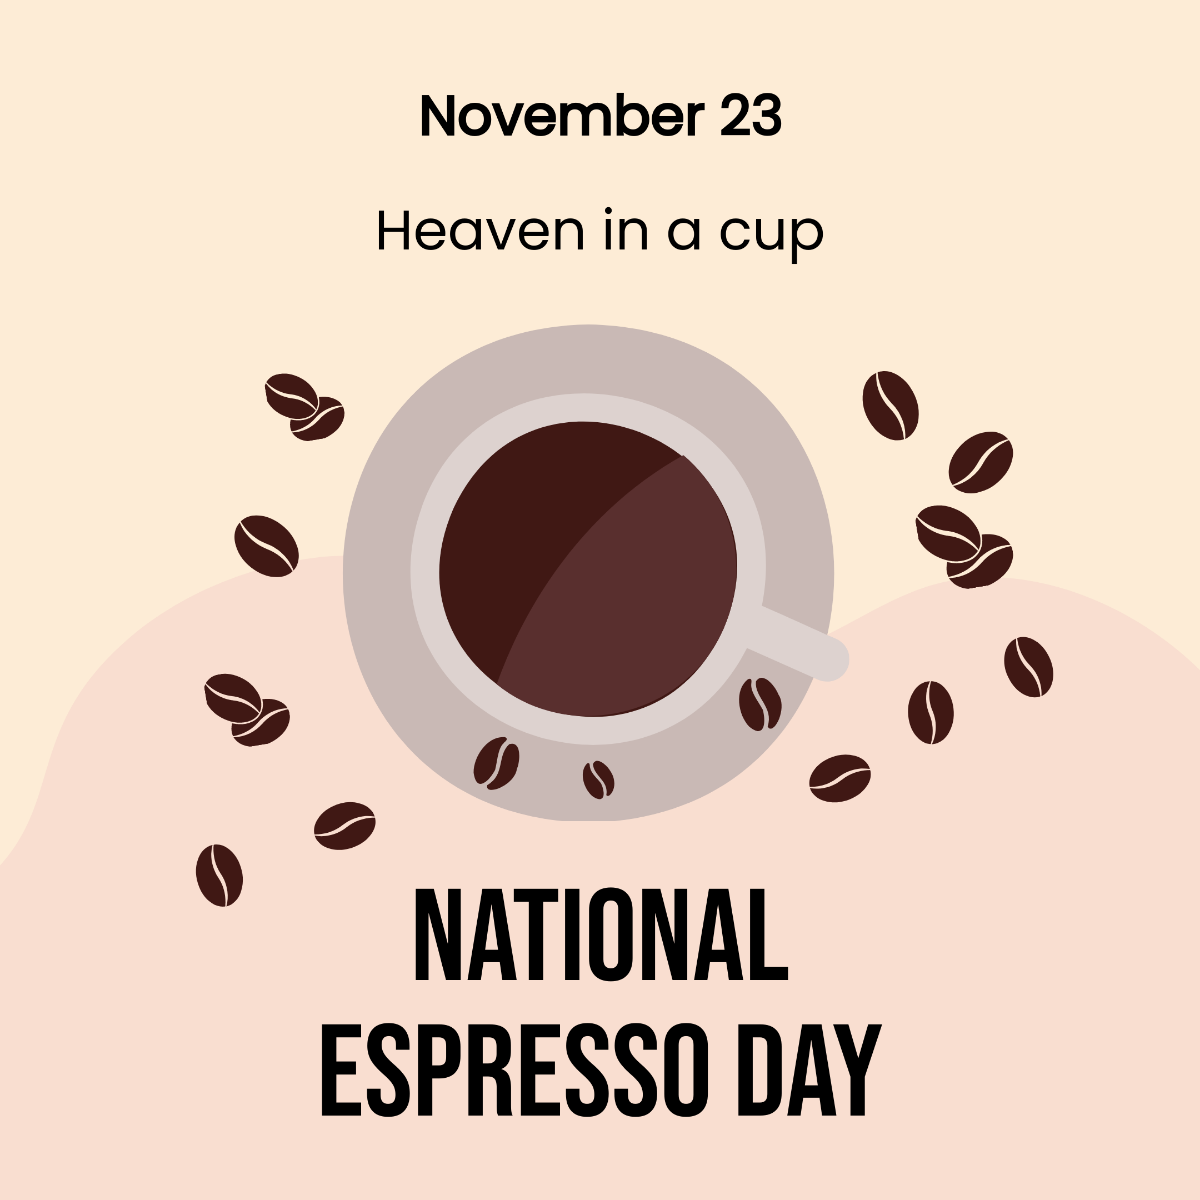 Free National Espresso Day Instagram Post Template